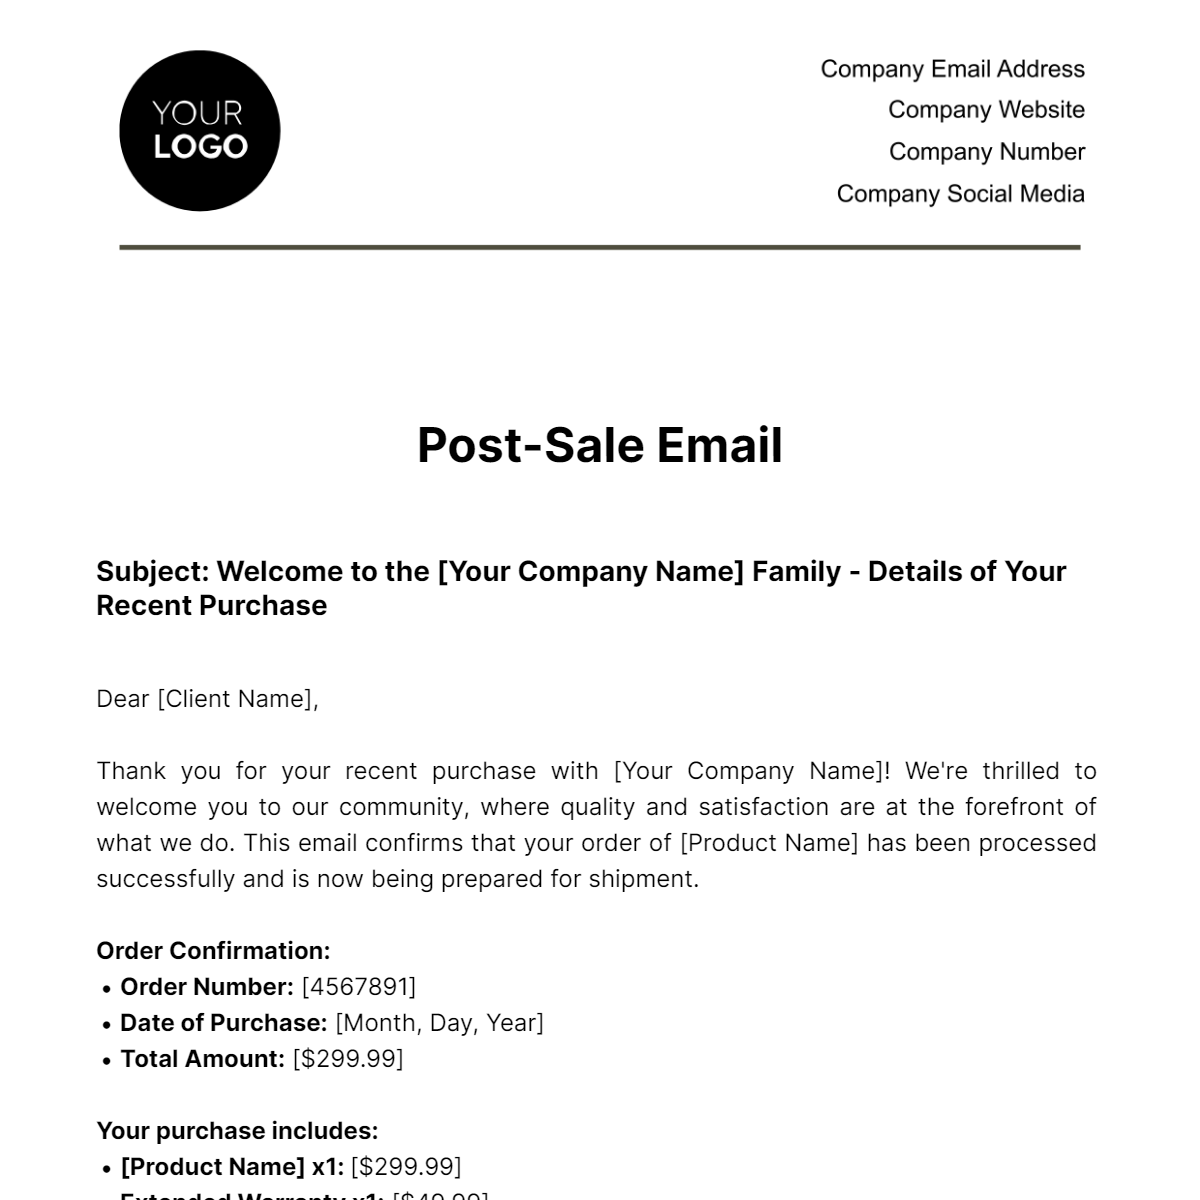 Post-Sale Email Template